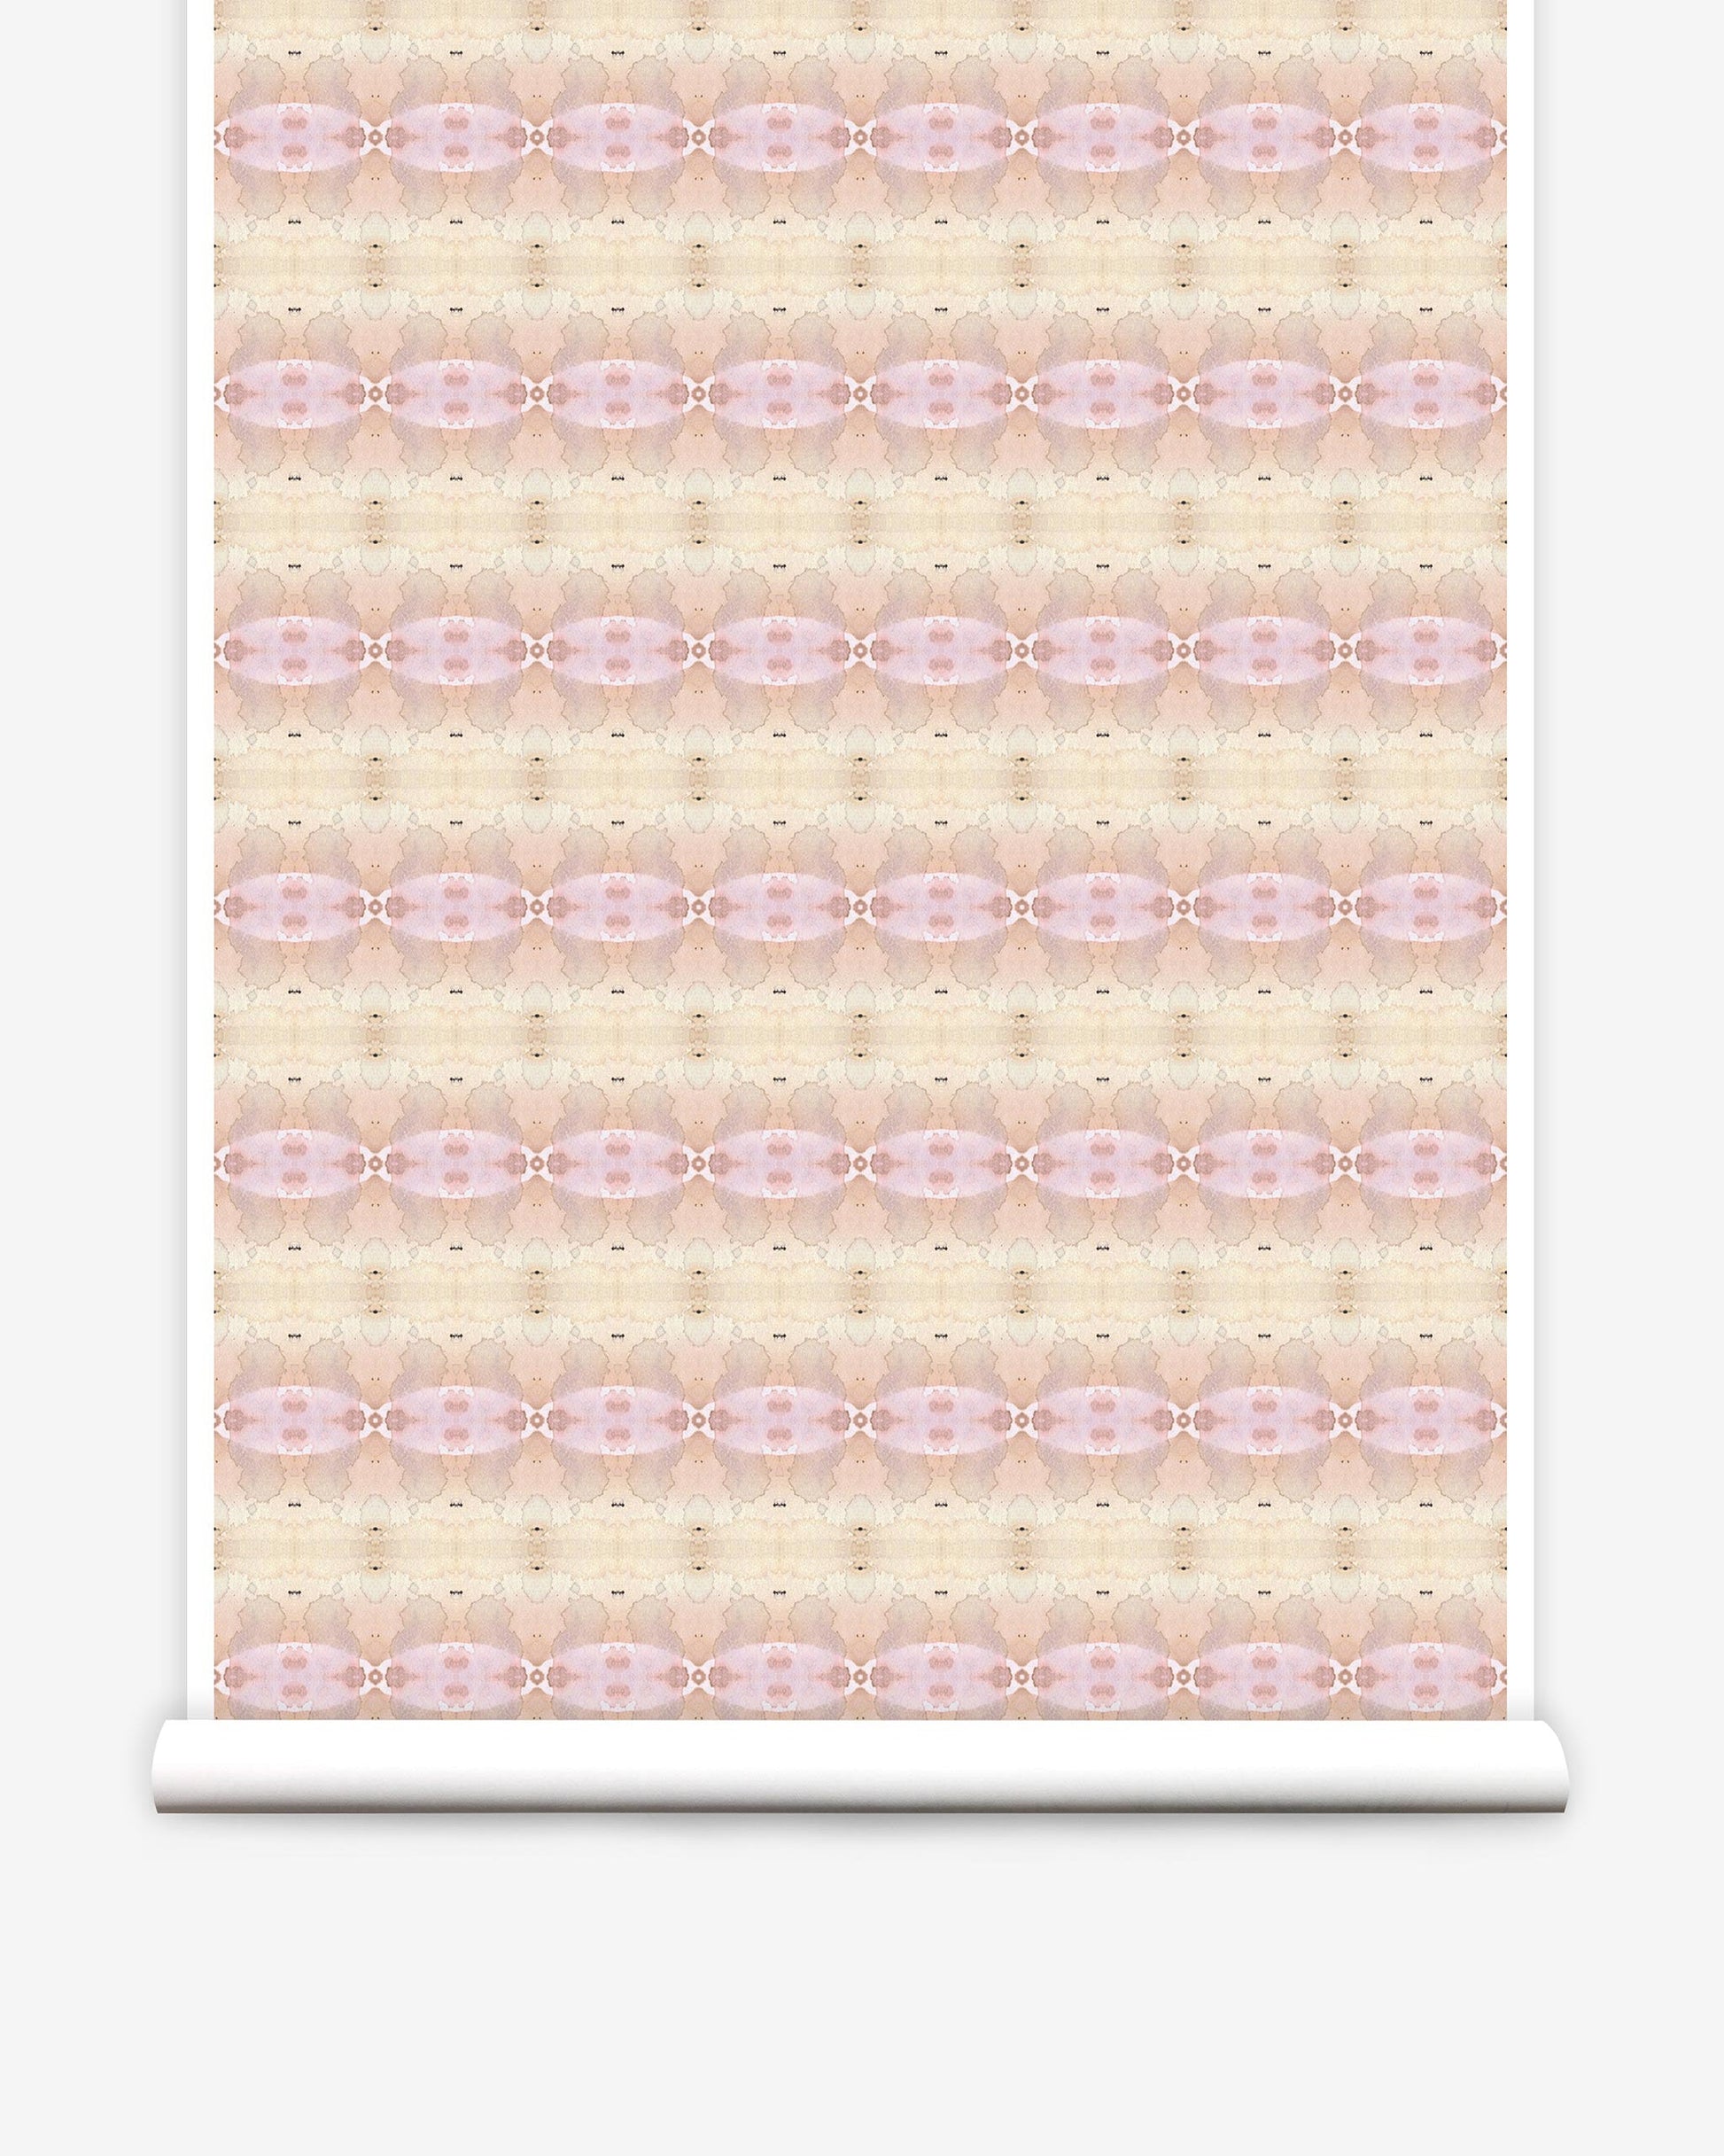 A pink and beige Setting Sun wallpaper on wallpaper